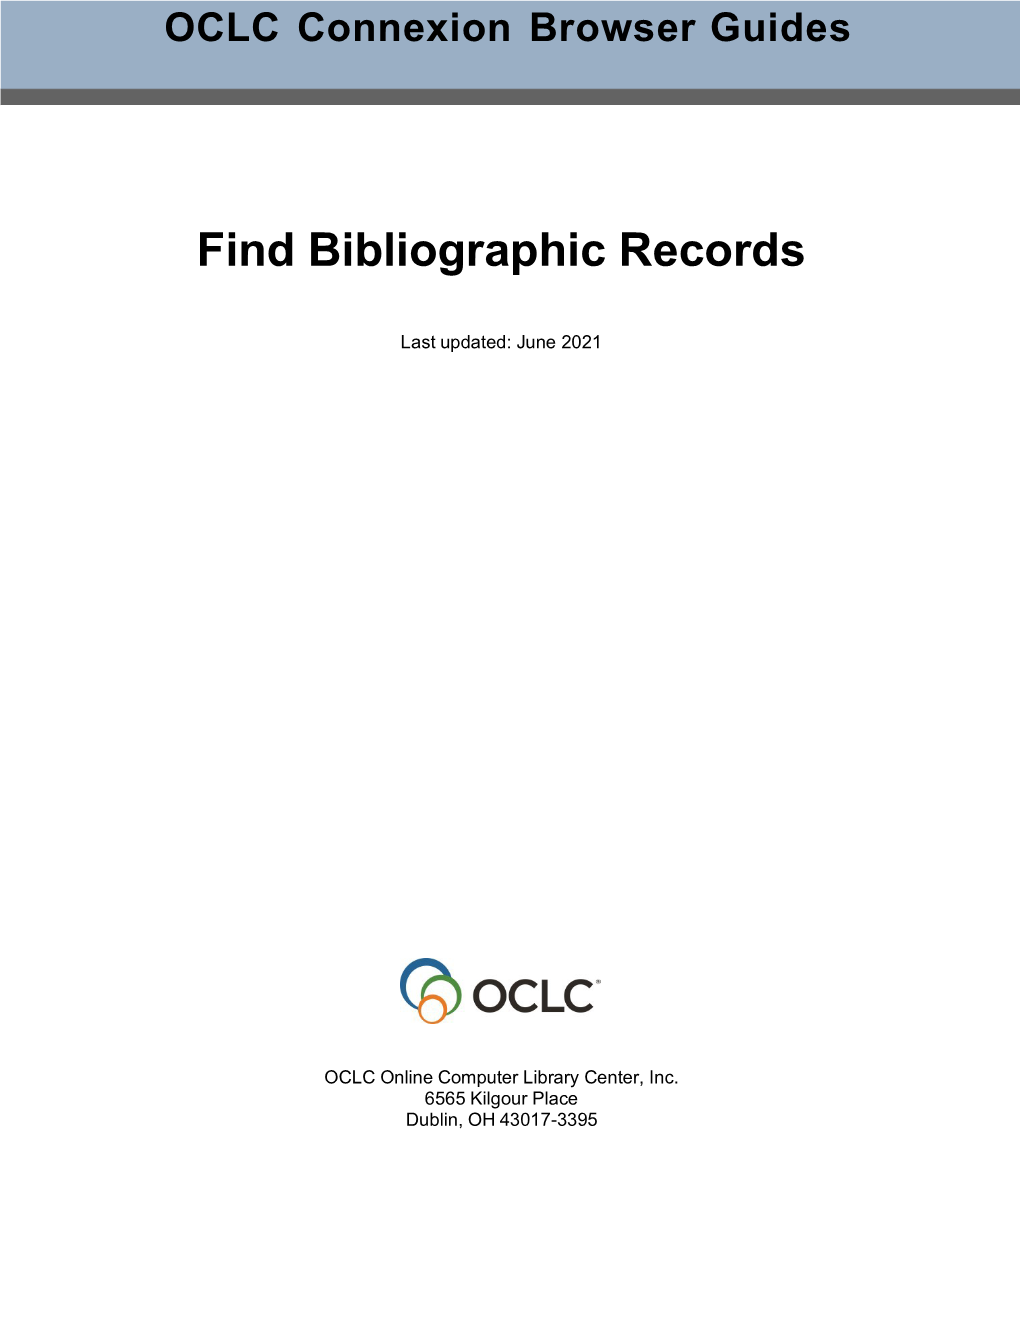 Find Bibliographic Records